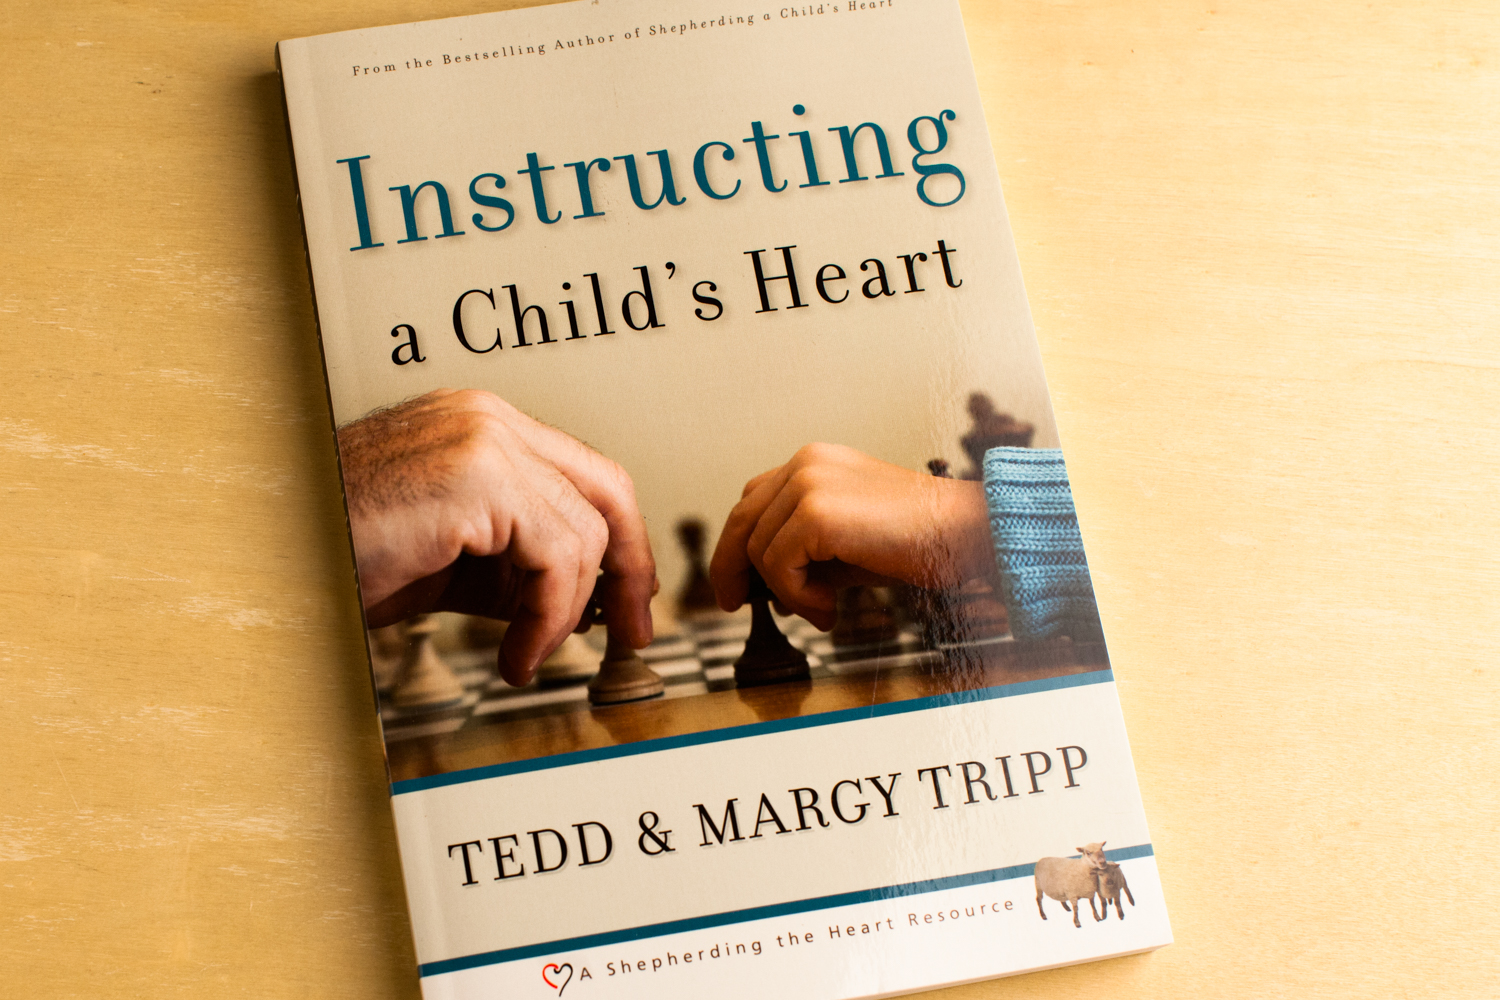 Instructing a Child’s Heart